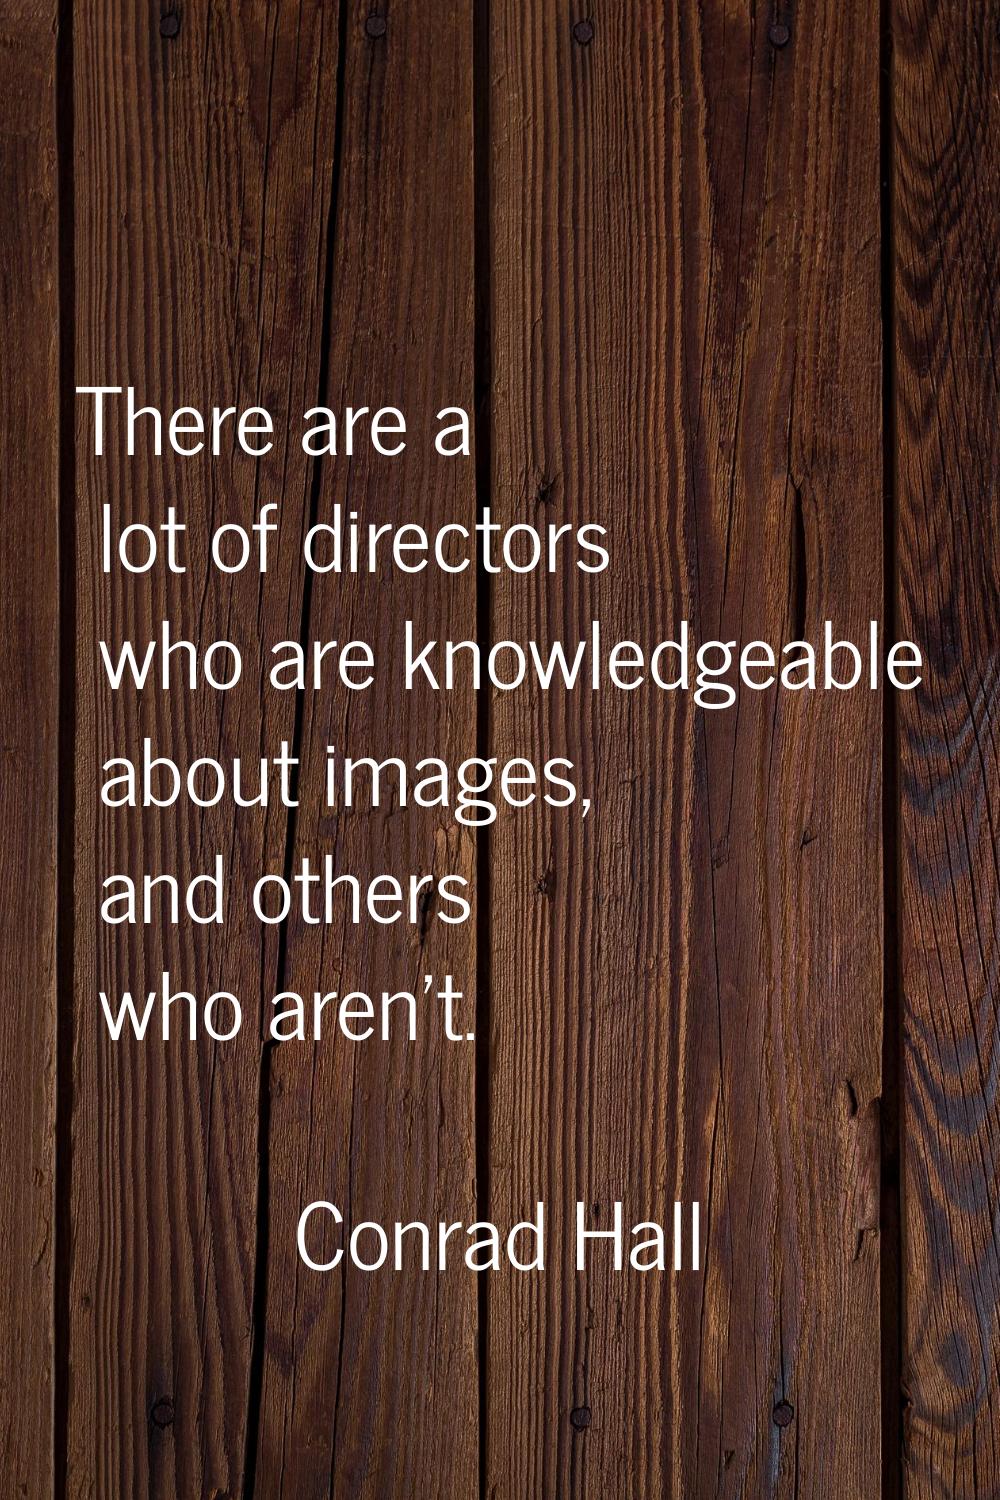 There are a lot of directors who are knowledgeable about images, and others who aren't.